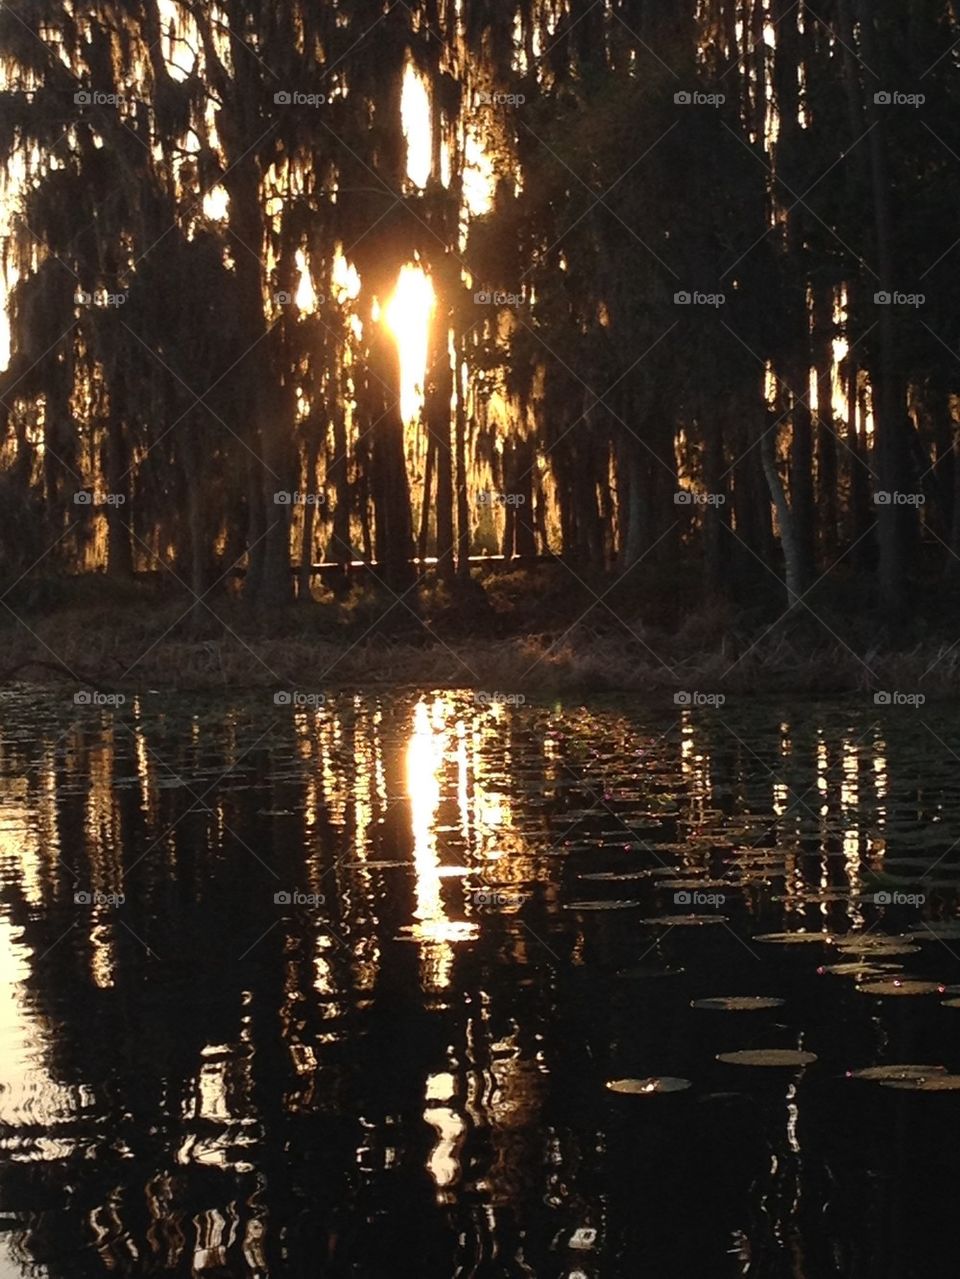 Sunset in the bayou